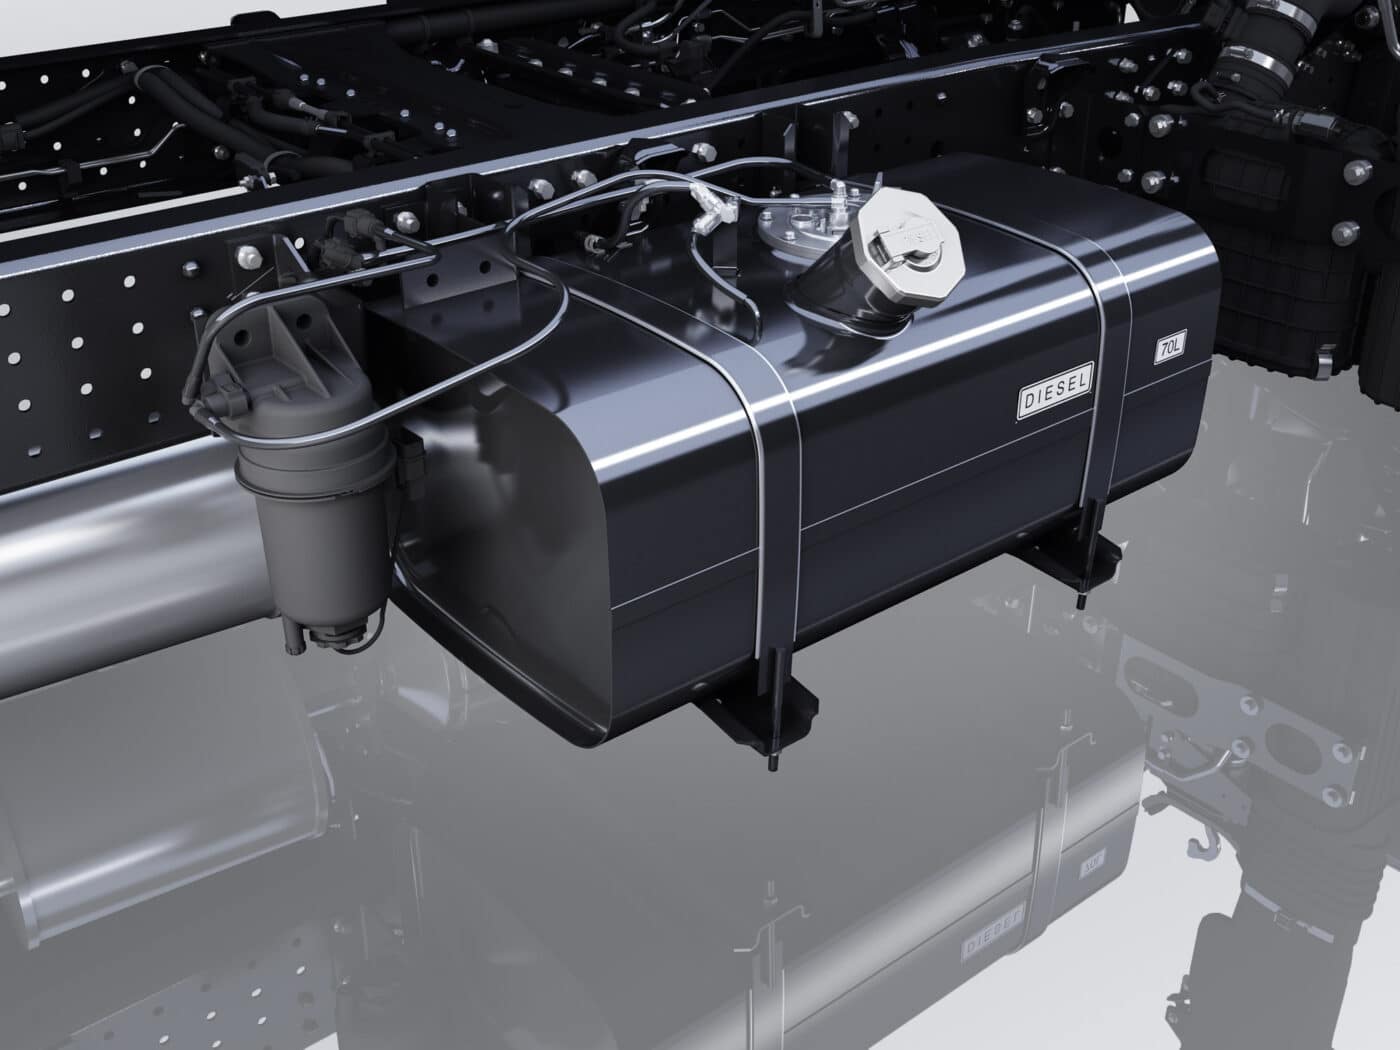 The FUSO 100 l Fuel Tank is installed on the right side of the chassis frame instead of the standard 70 l. The 70 l spare fuel tank offers you an increased driving range, can be used as an addition to your 100 l fuel tank and serves as a range extender.